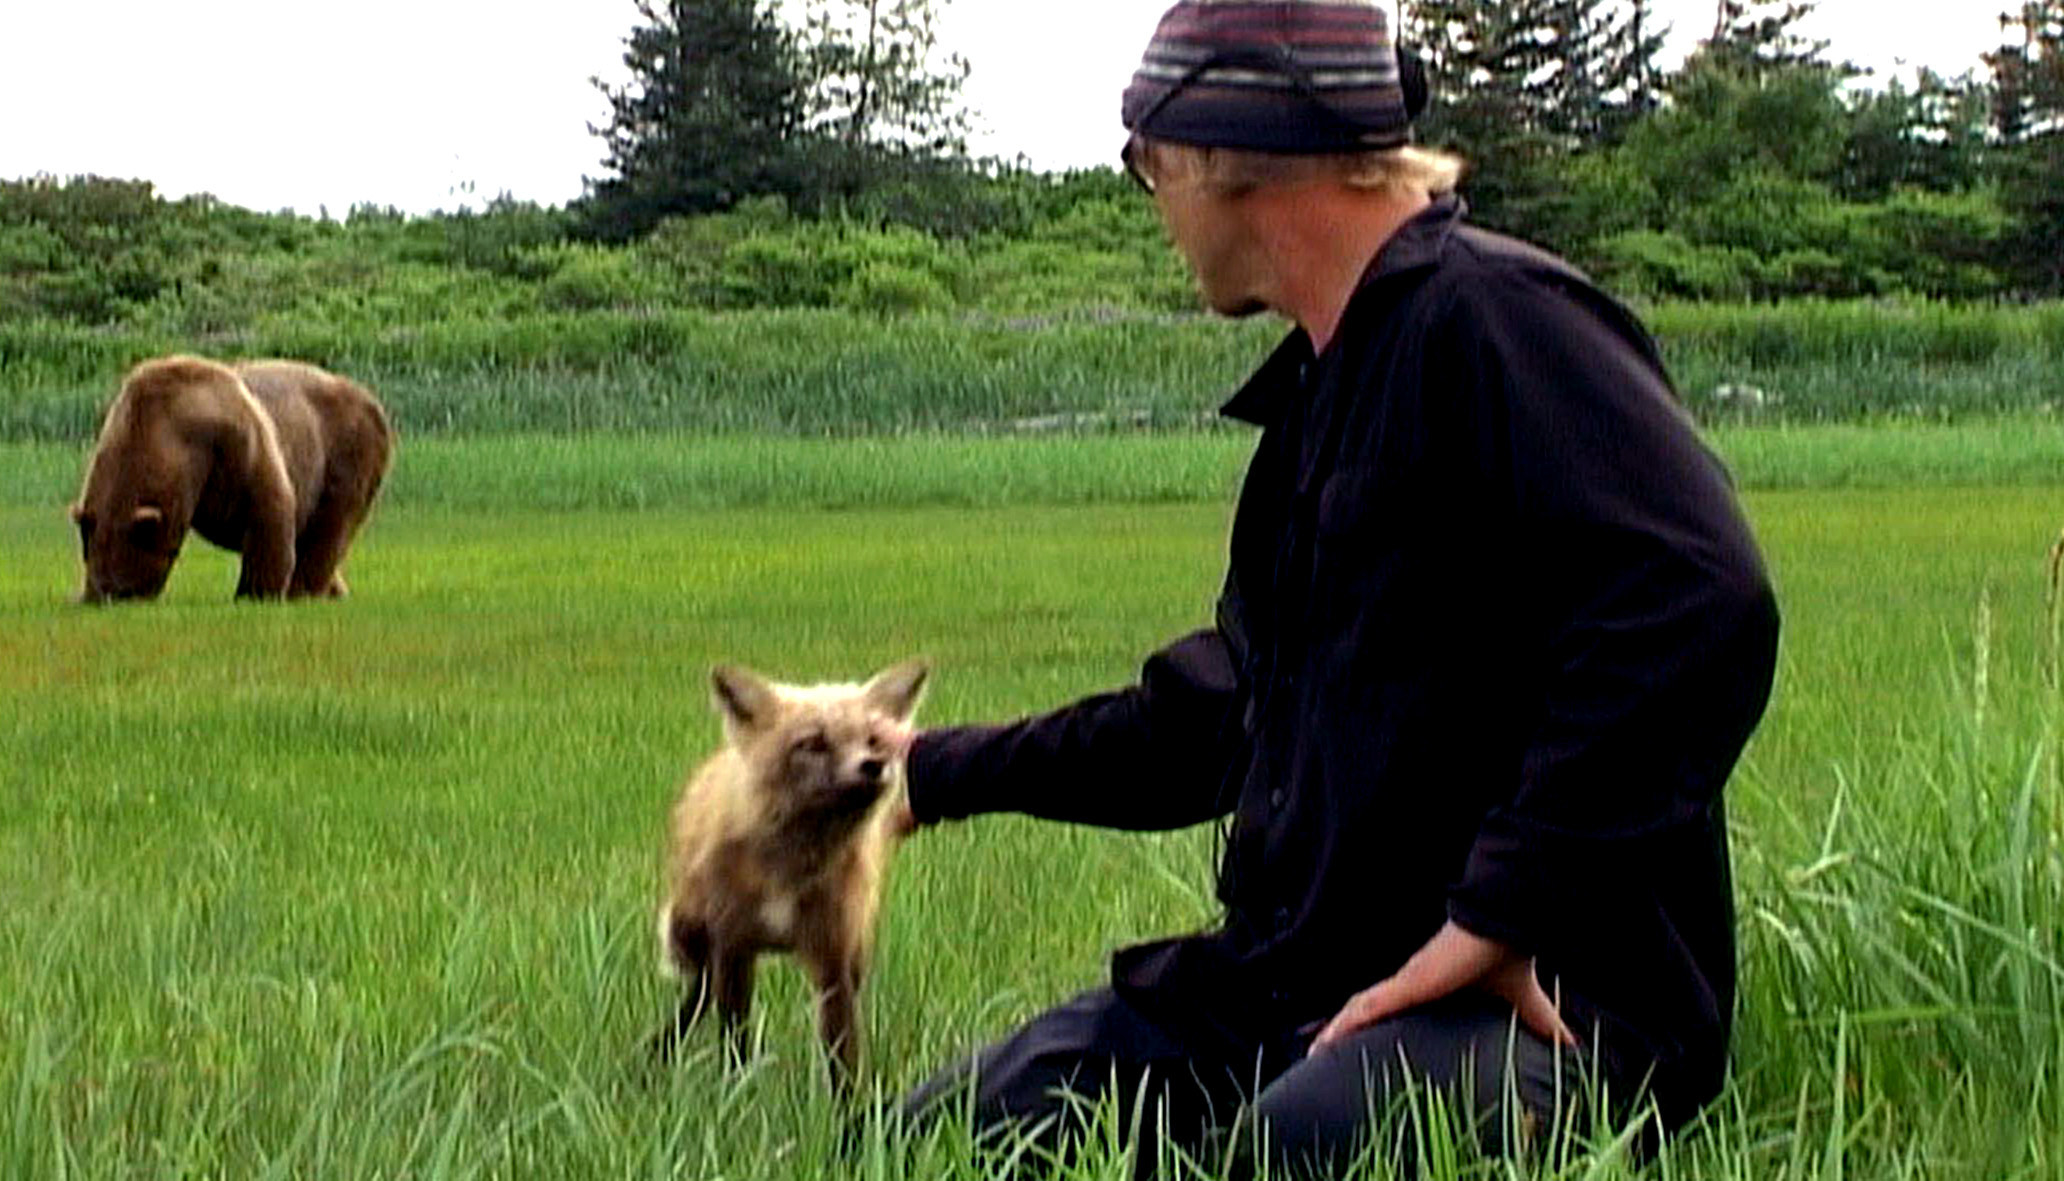 A man pets a fox while a grizzly bear looks on in the background